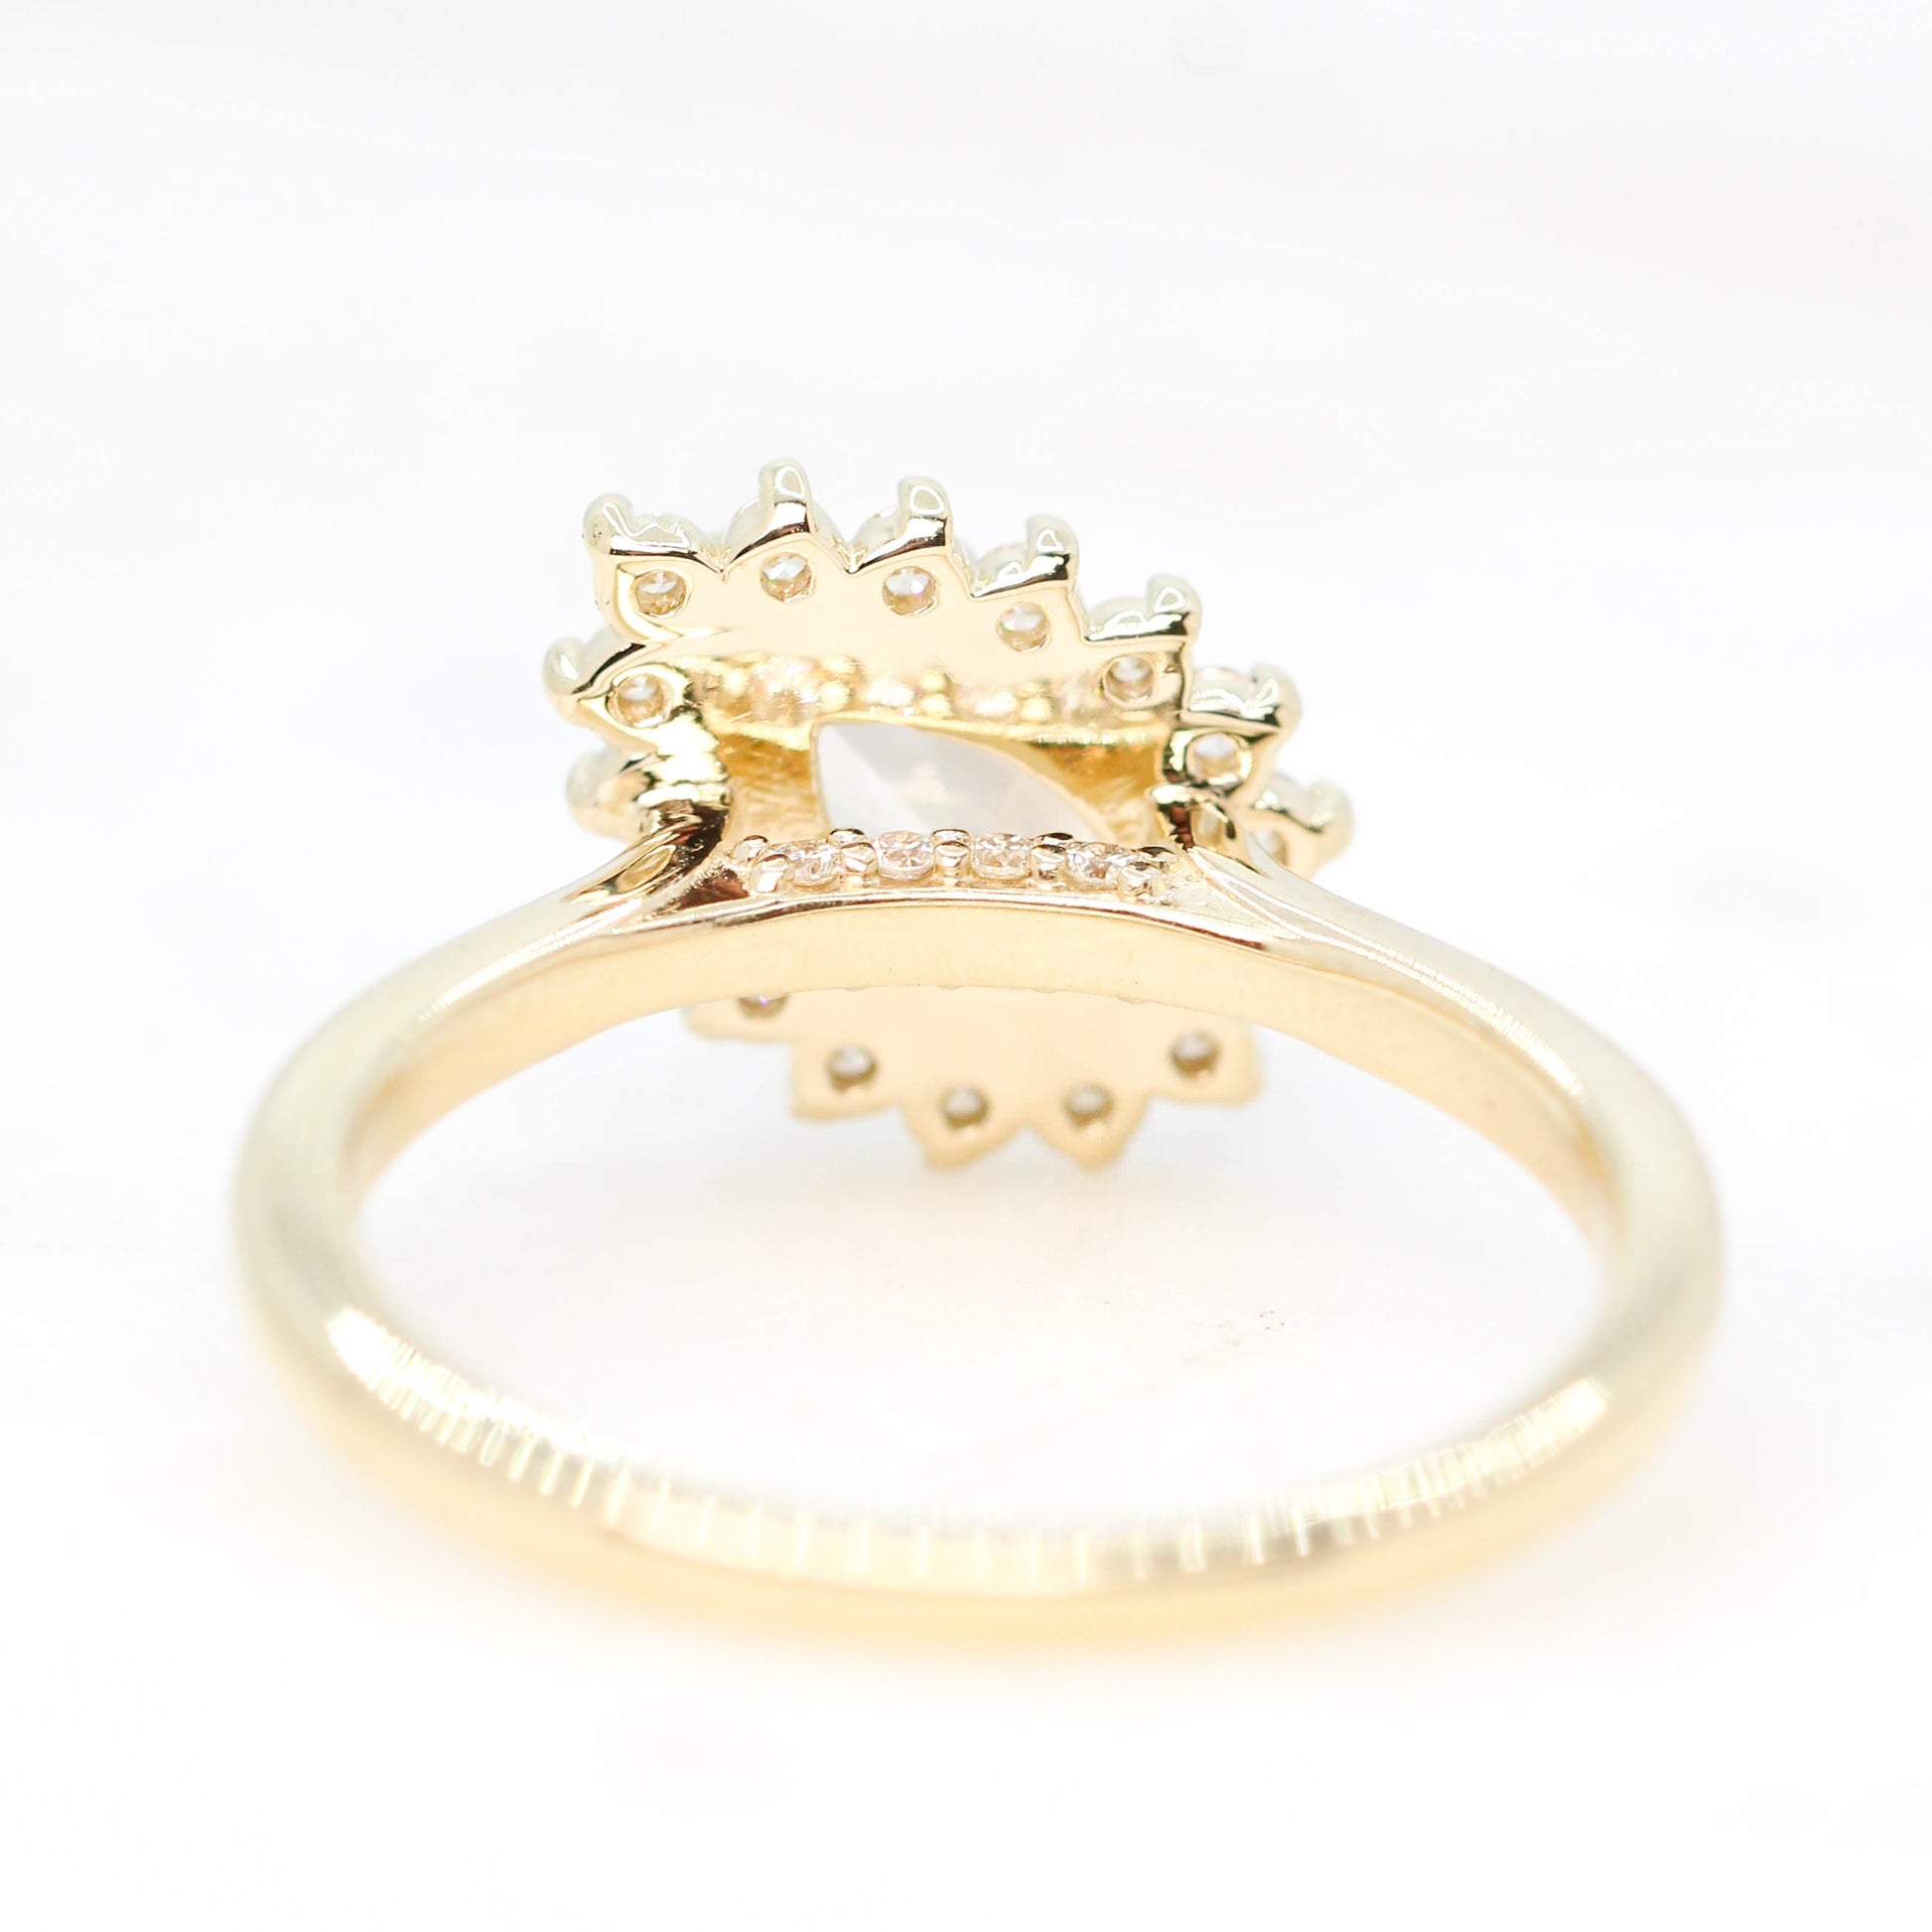 Velma Ring with a 1.30 Carat Misty White Pear Diamond and White Diamond Accents in 14k Yellow Gold - Ready to Size and Ship - Midwinter Co. Alternative Bridal Rings and Modern Fine Jewelry